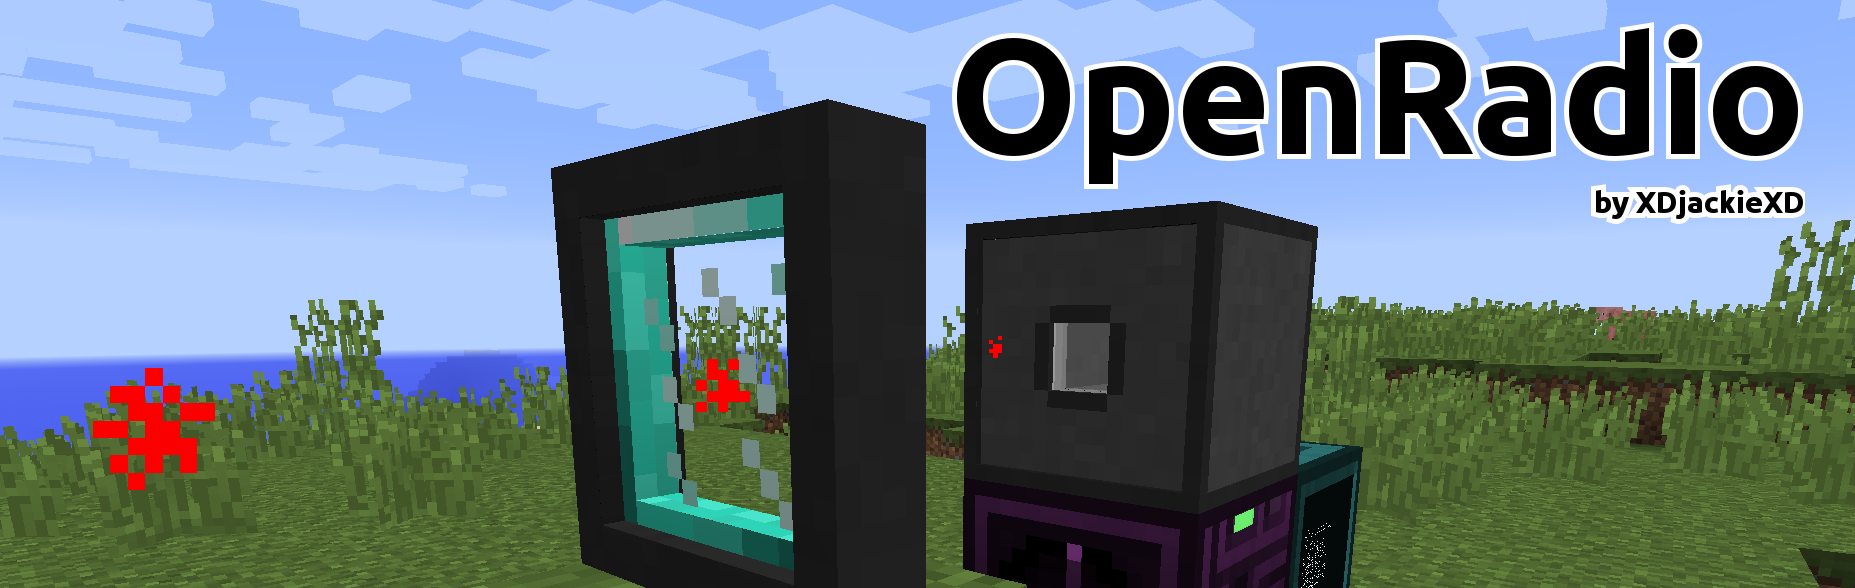 Overview - OpenRadio - Mods - Projects - Minecraft CurseForge